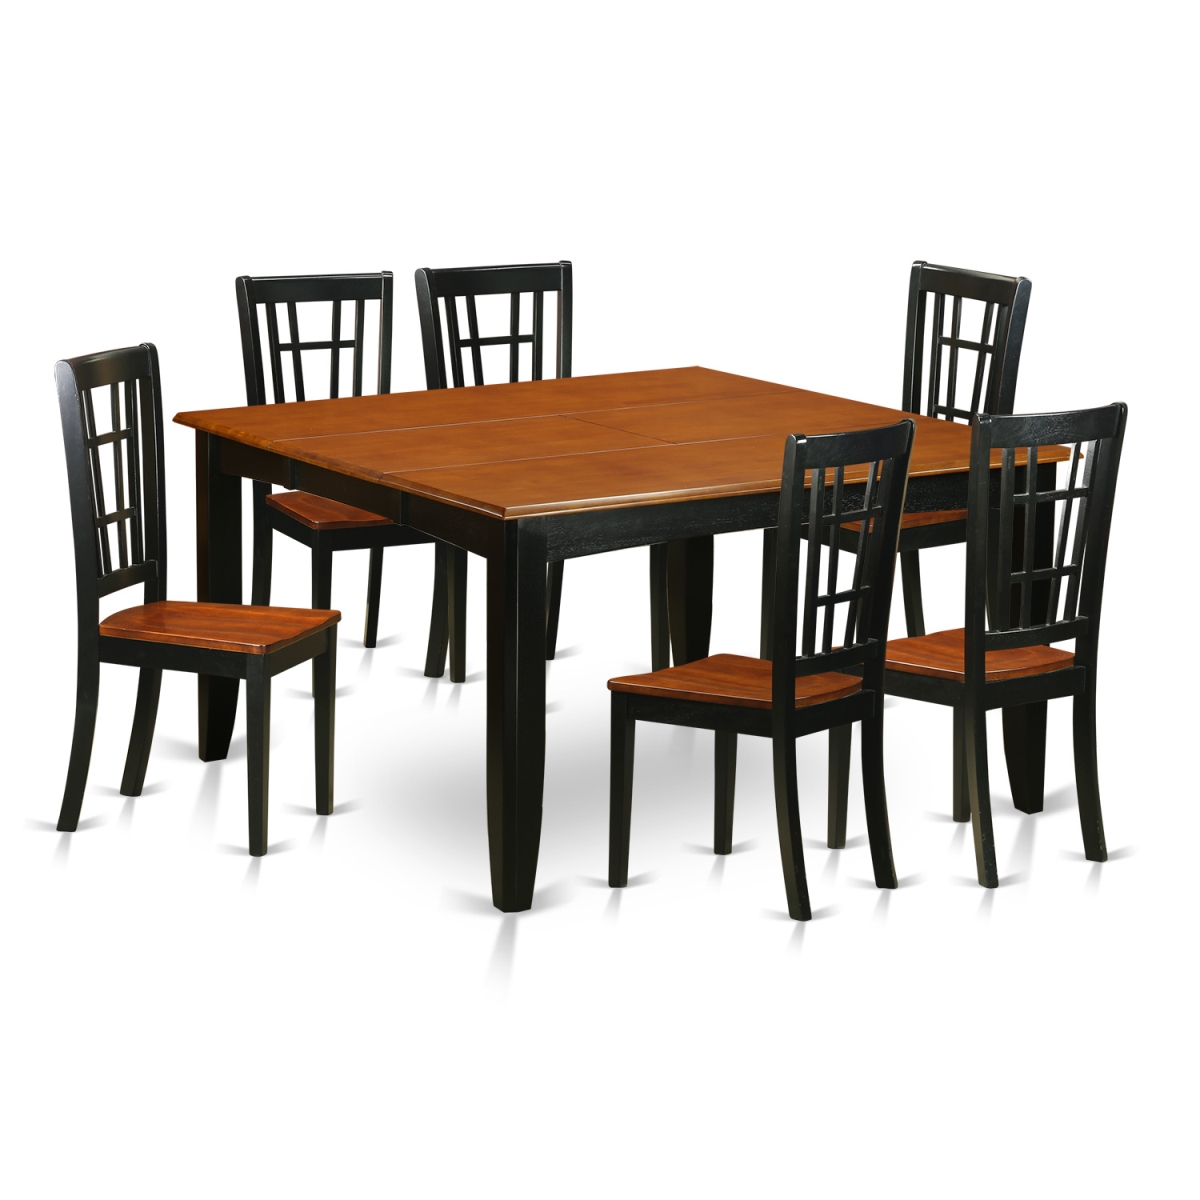 PFNI7-BCH-W Wood Seat Dining Room Set - Table & 6 Solid Chair, Black & Cherry - 7 Piece -  East West Furniture